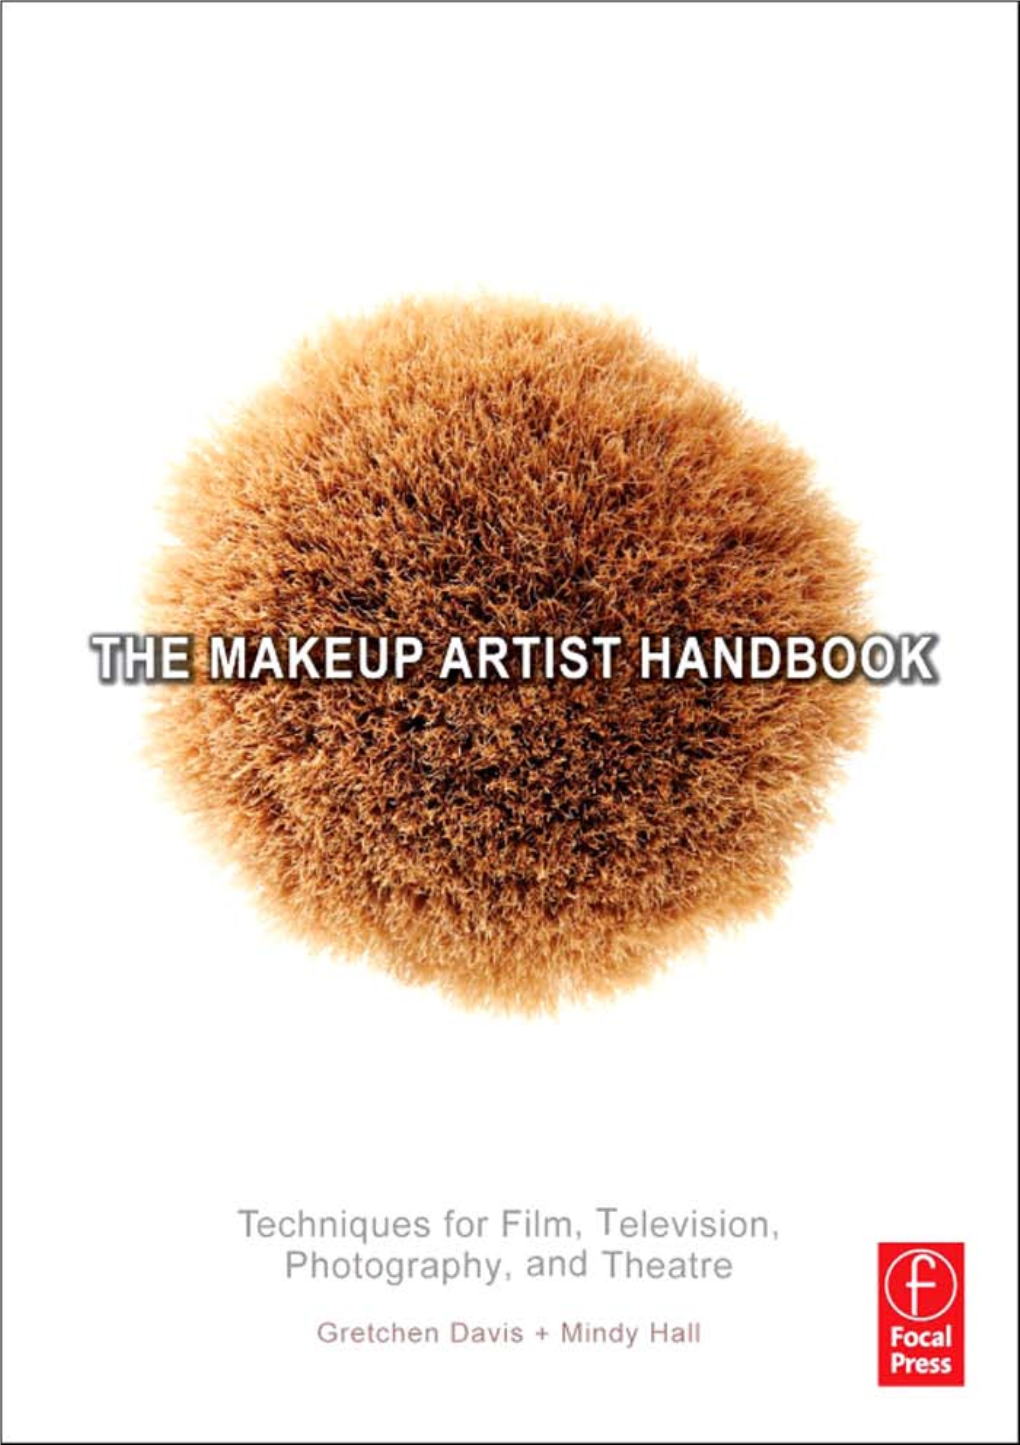 THE MAKEUP ARTIST HANDBOOK This Page Intentionally Left Blank the MAKEUP ARTIST HANDBOOK: Techniques for Film, Television, Photography, and Theatre